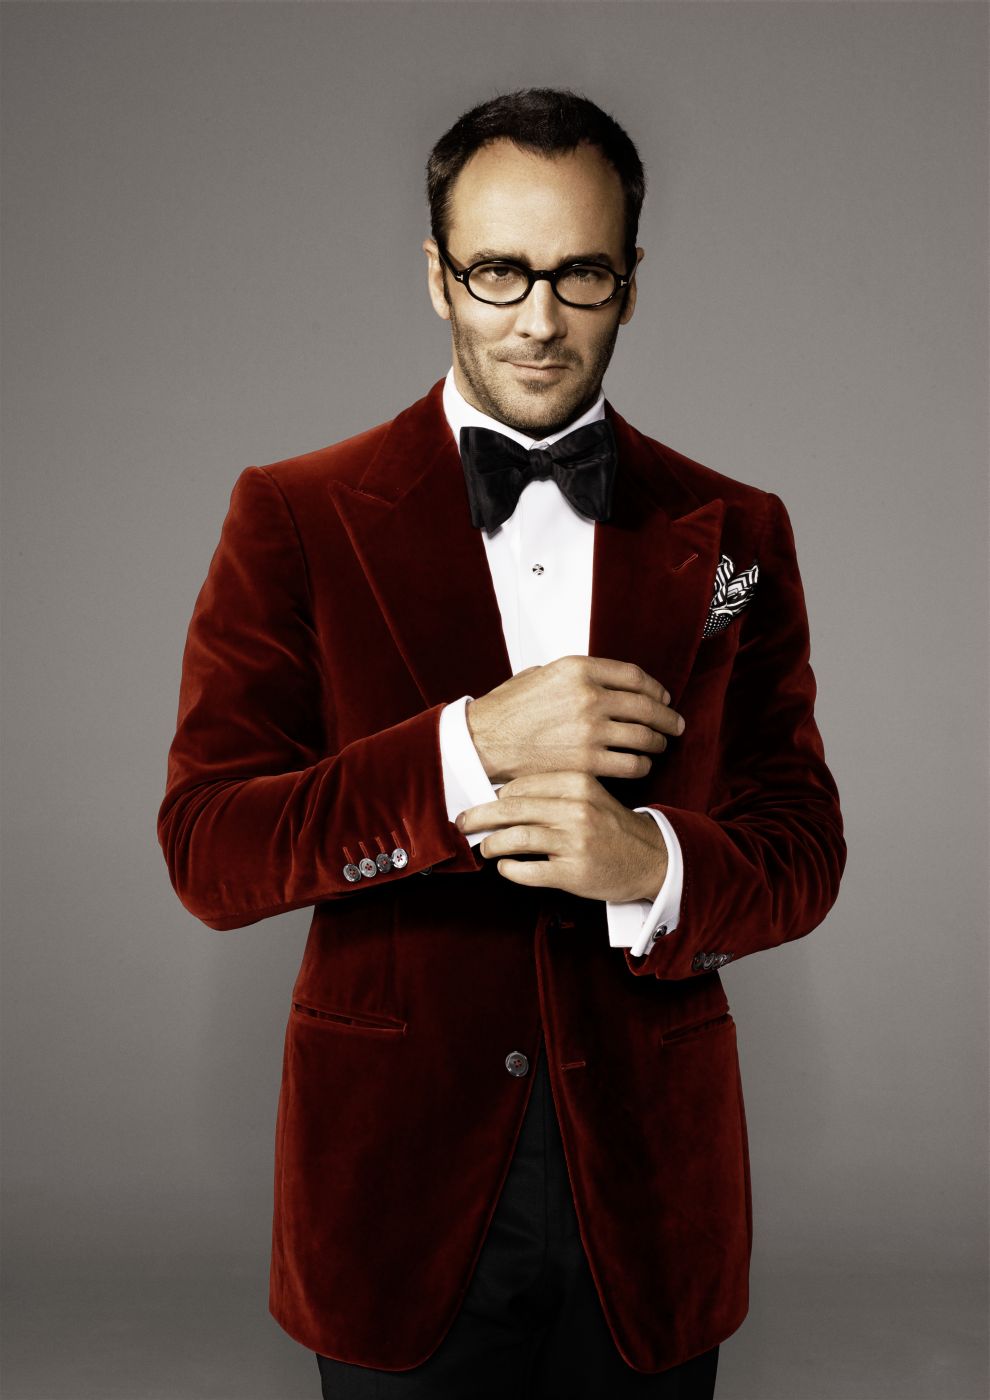 Tom Ford photo 8 of 76 pics, wallpaper - photo #237822 - ThePlace2